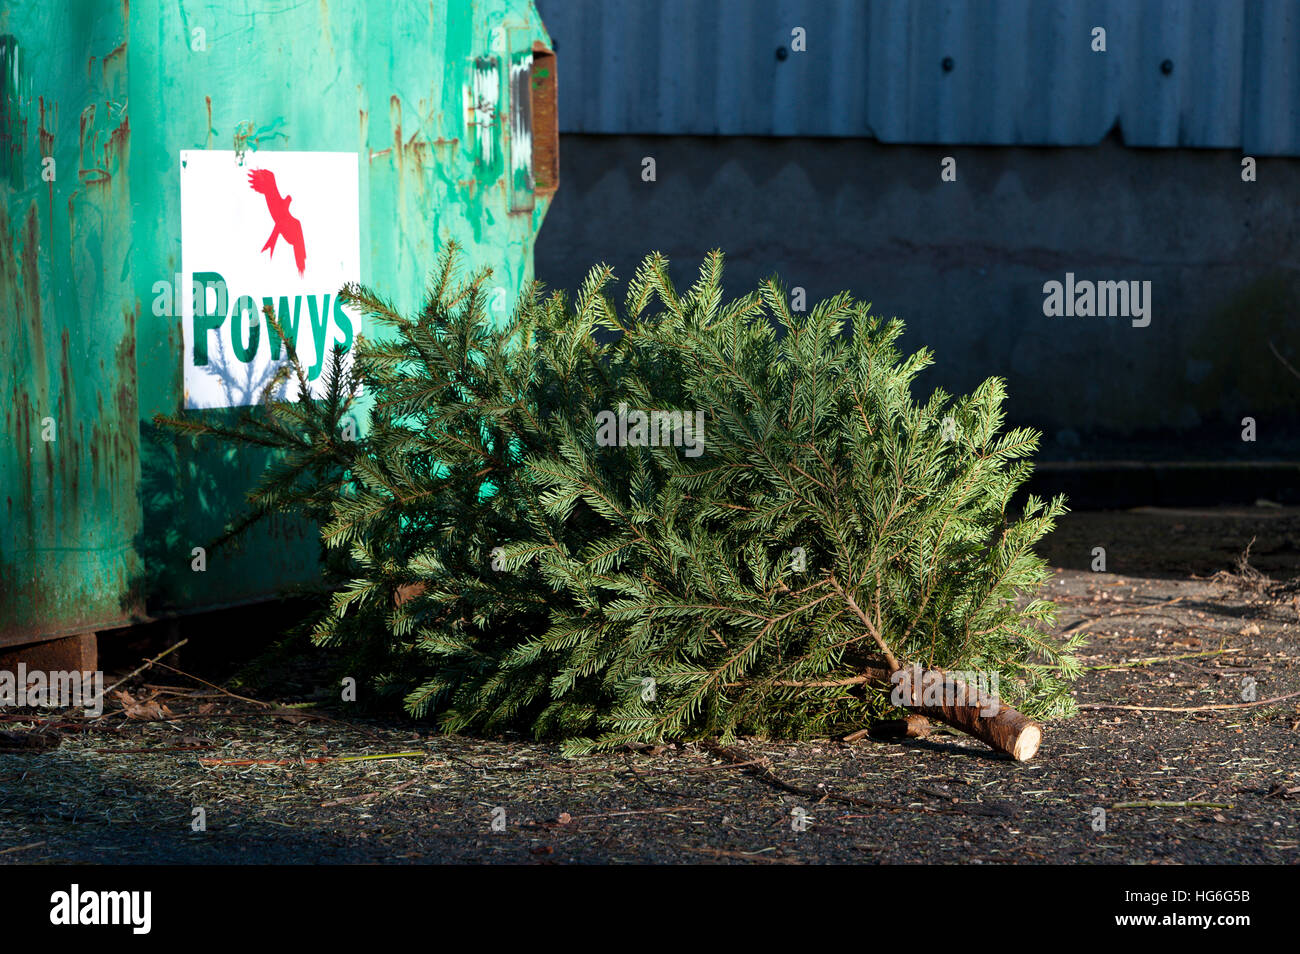 Builth Wells, Powys, Wales, UK. 5th January, 2017. Discarded Christmas trees are seen at the garden waste recycling area in the small Welsh market town of Builth Wells in Powys, UK. © Graham M. Lawrence/Alamy Live News. Stock Photo